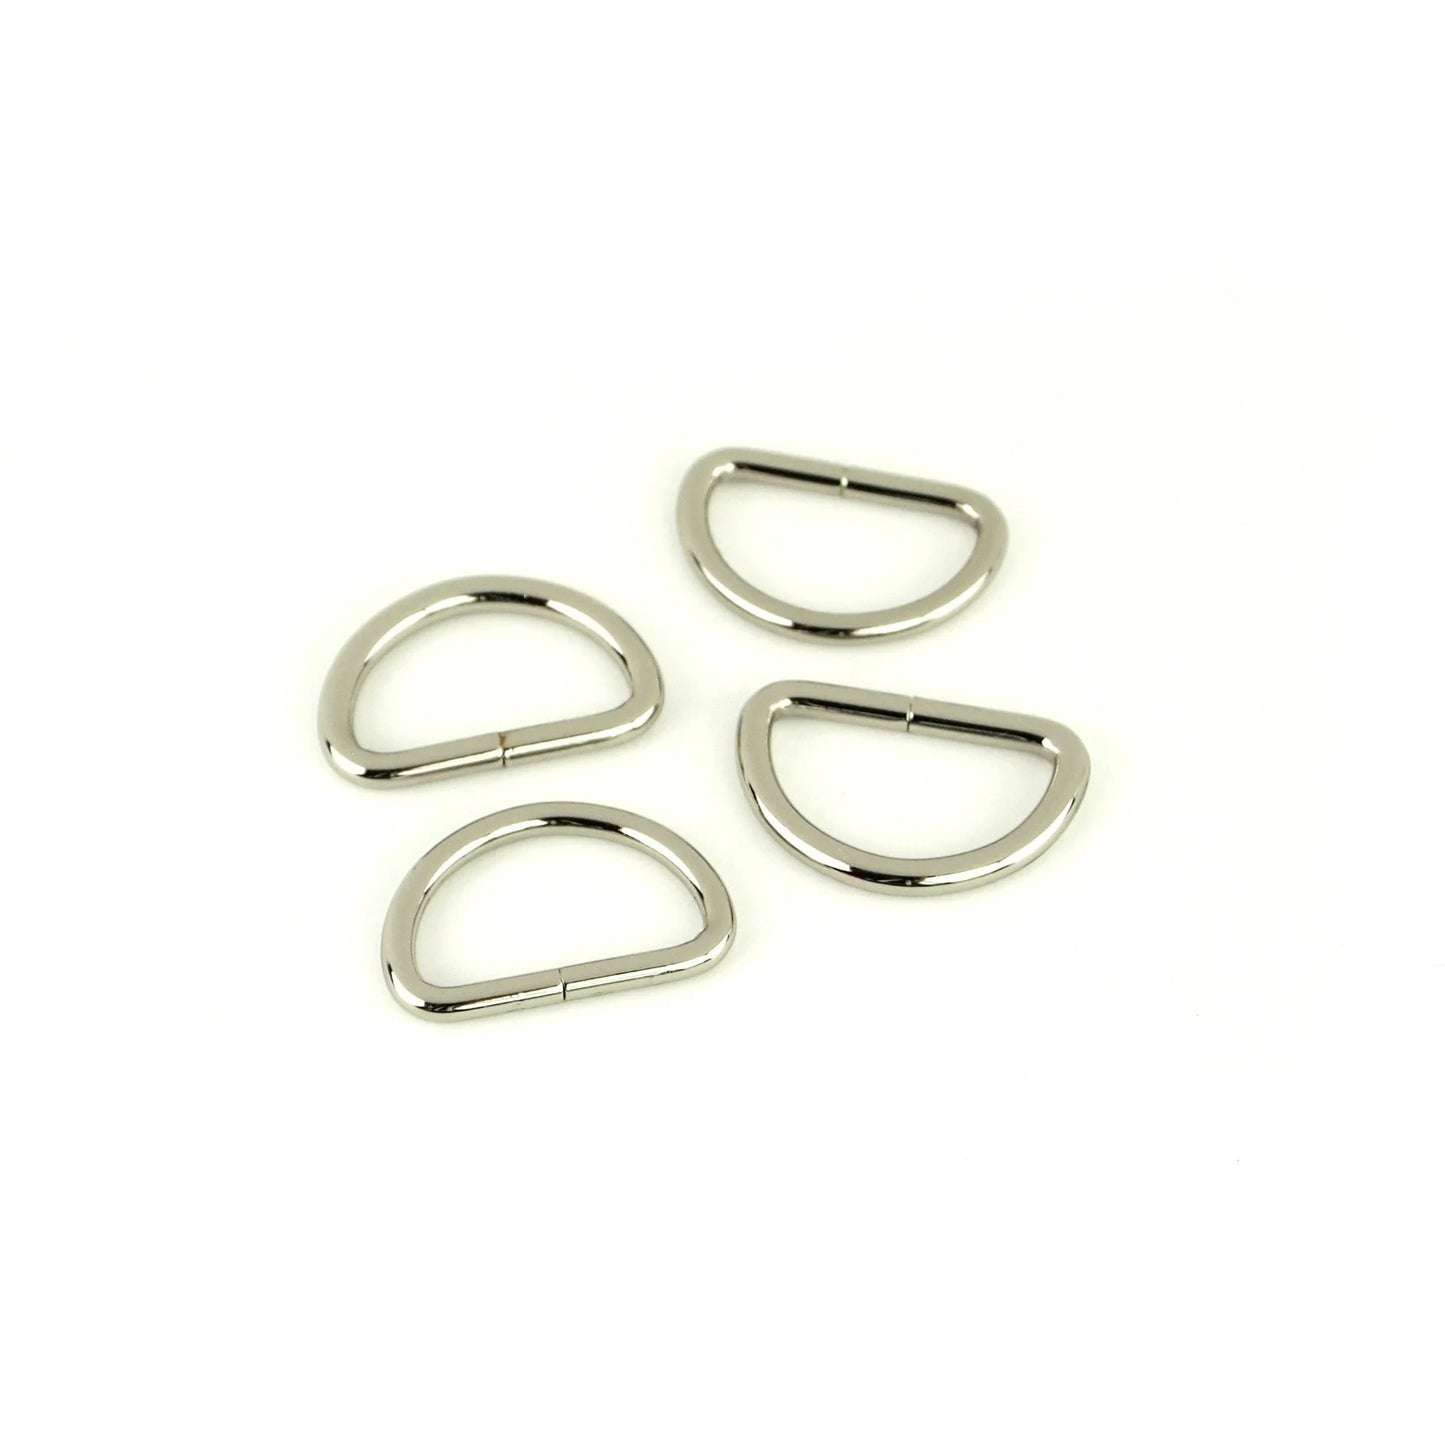 Sallie Tomato 1 Inch Silver D-Rings